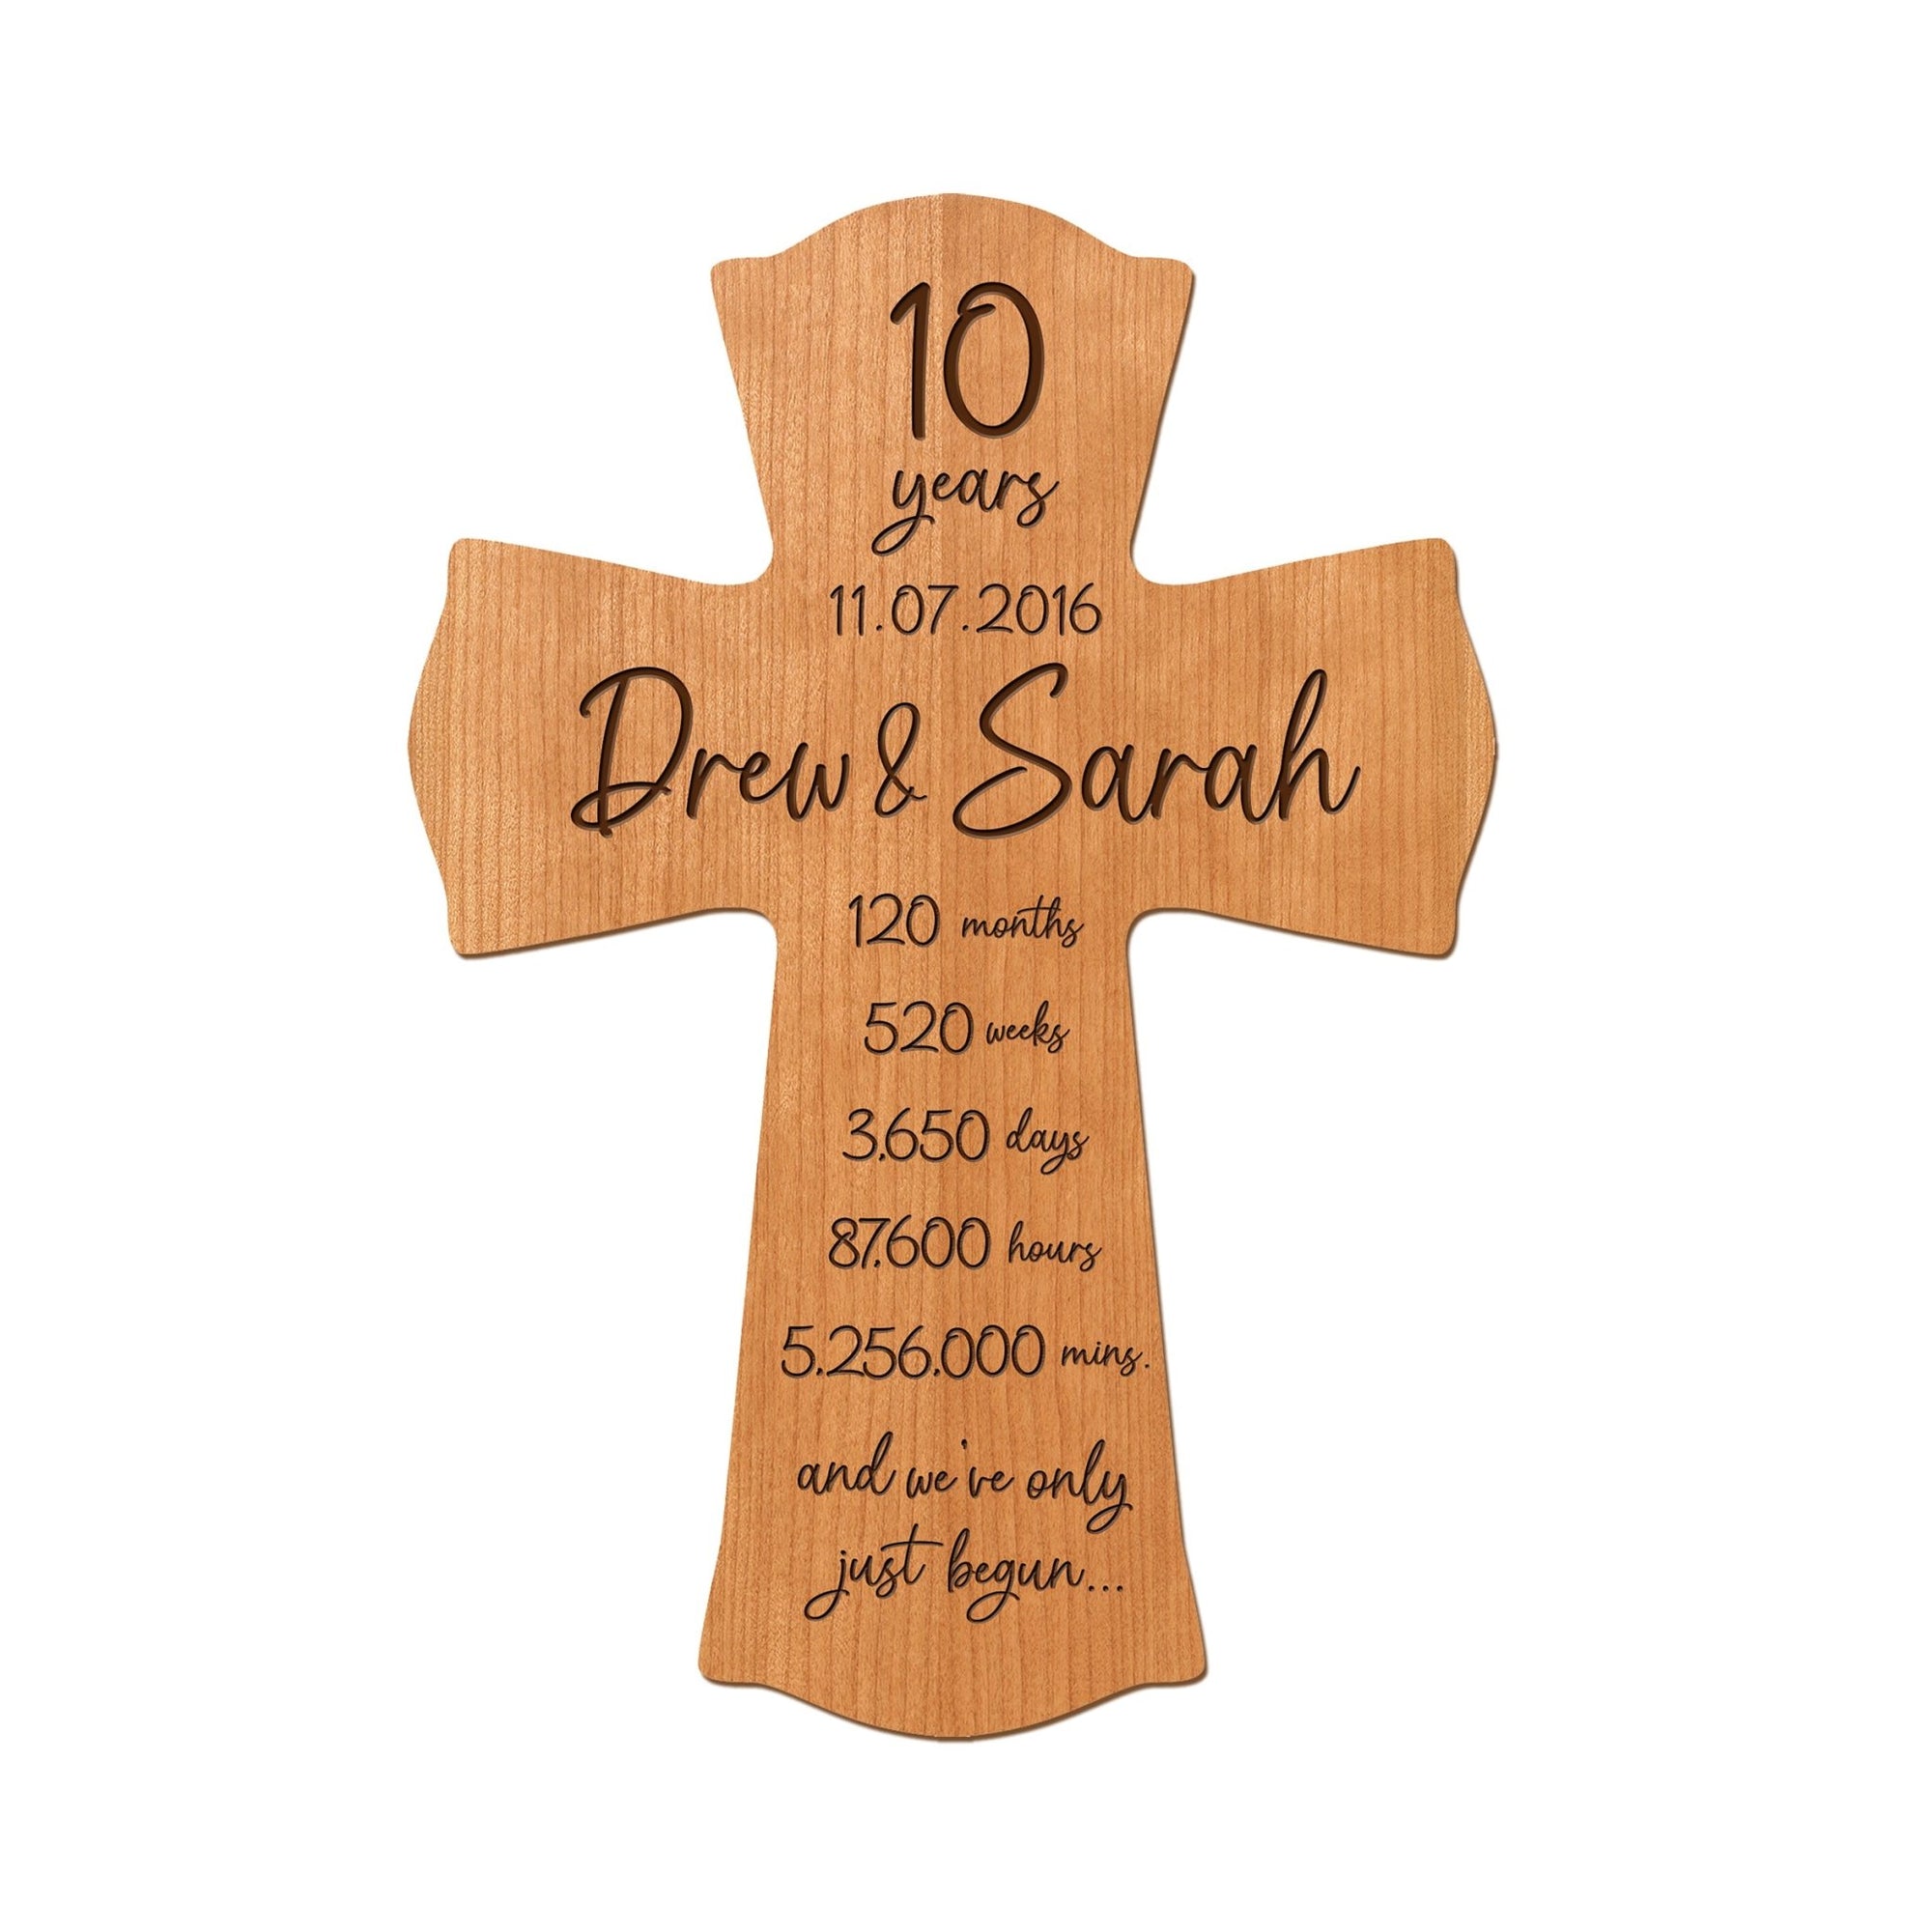 Lifesong Milestones Elegant Personalized Wall Cross – Ideal 10th Anniversary Gift for Couple